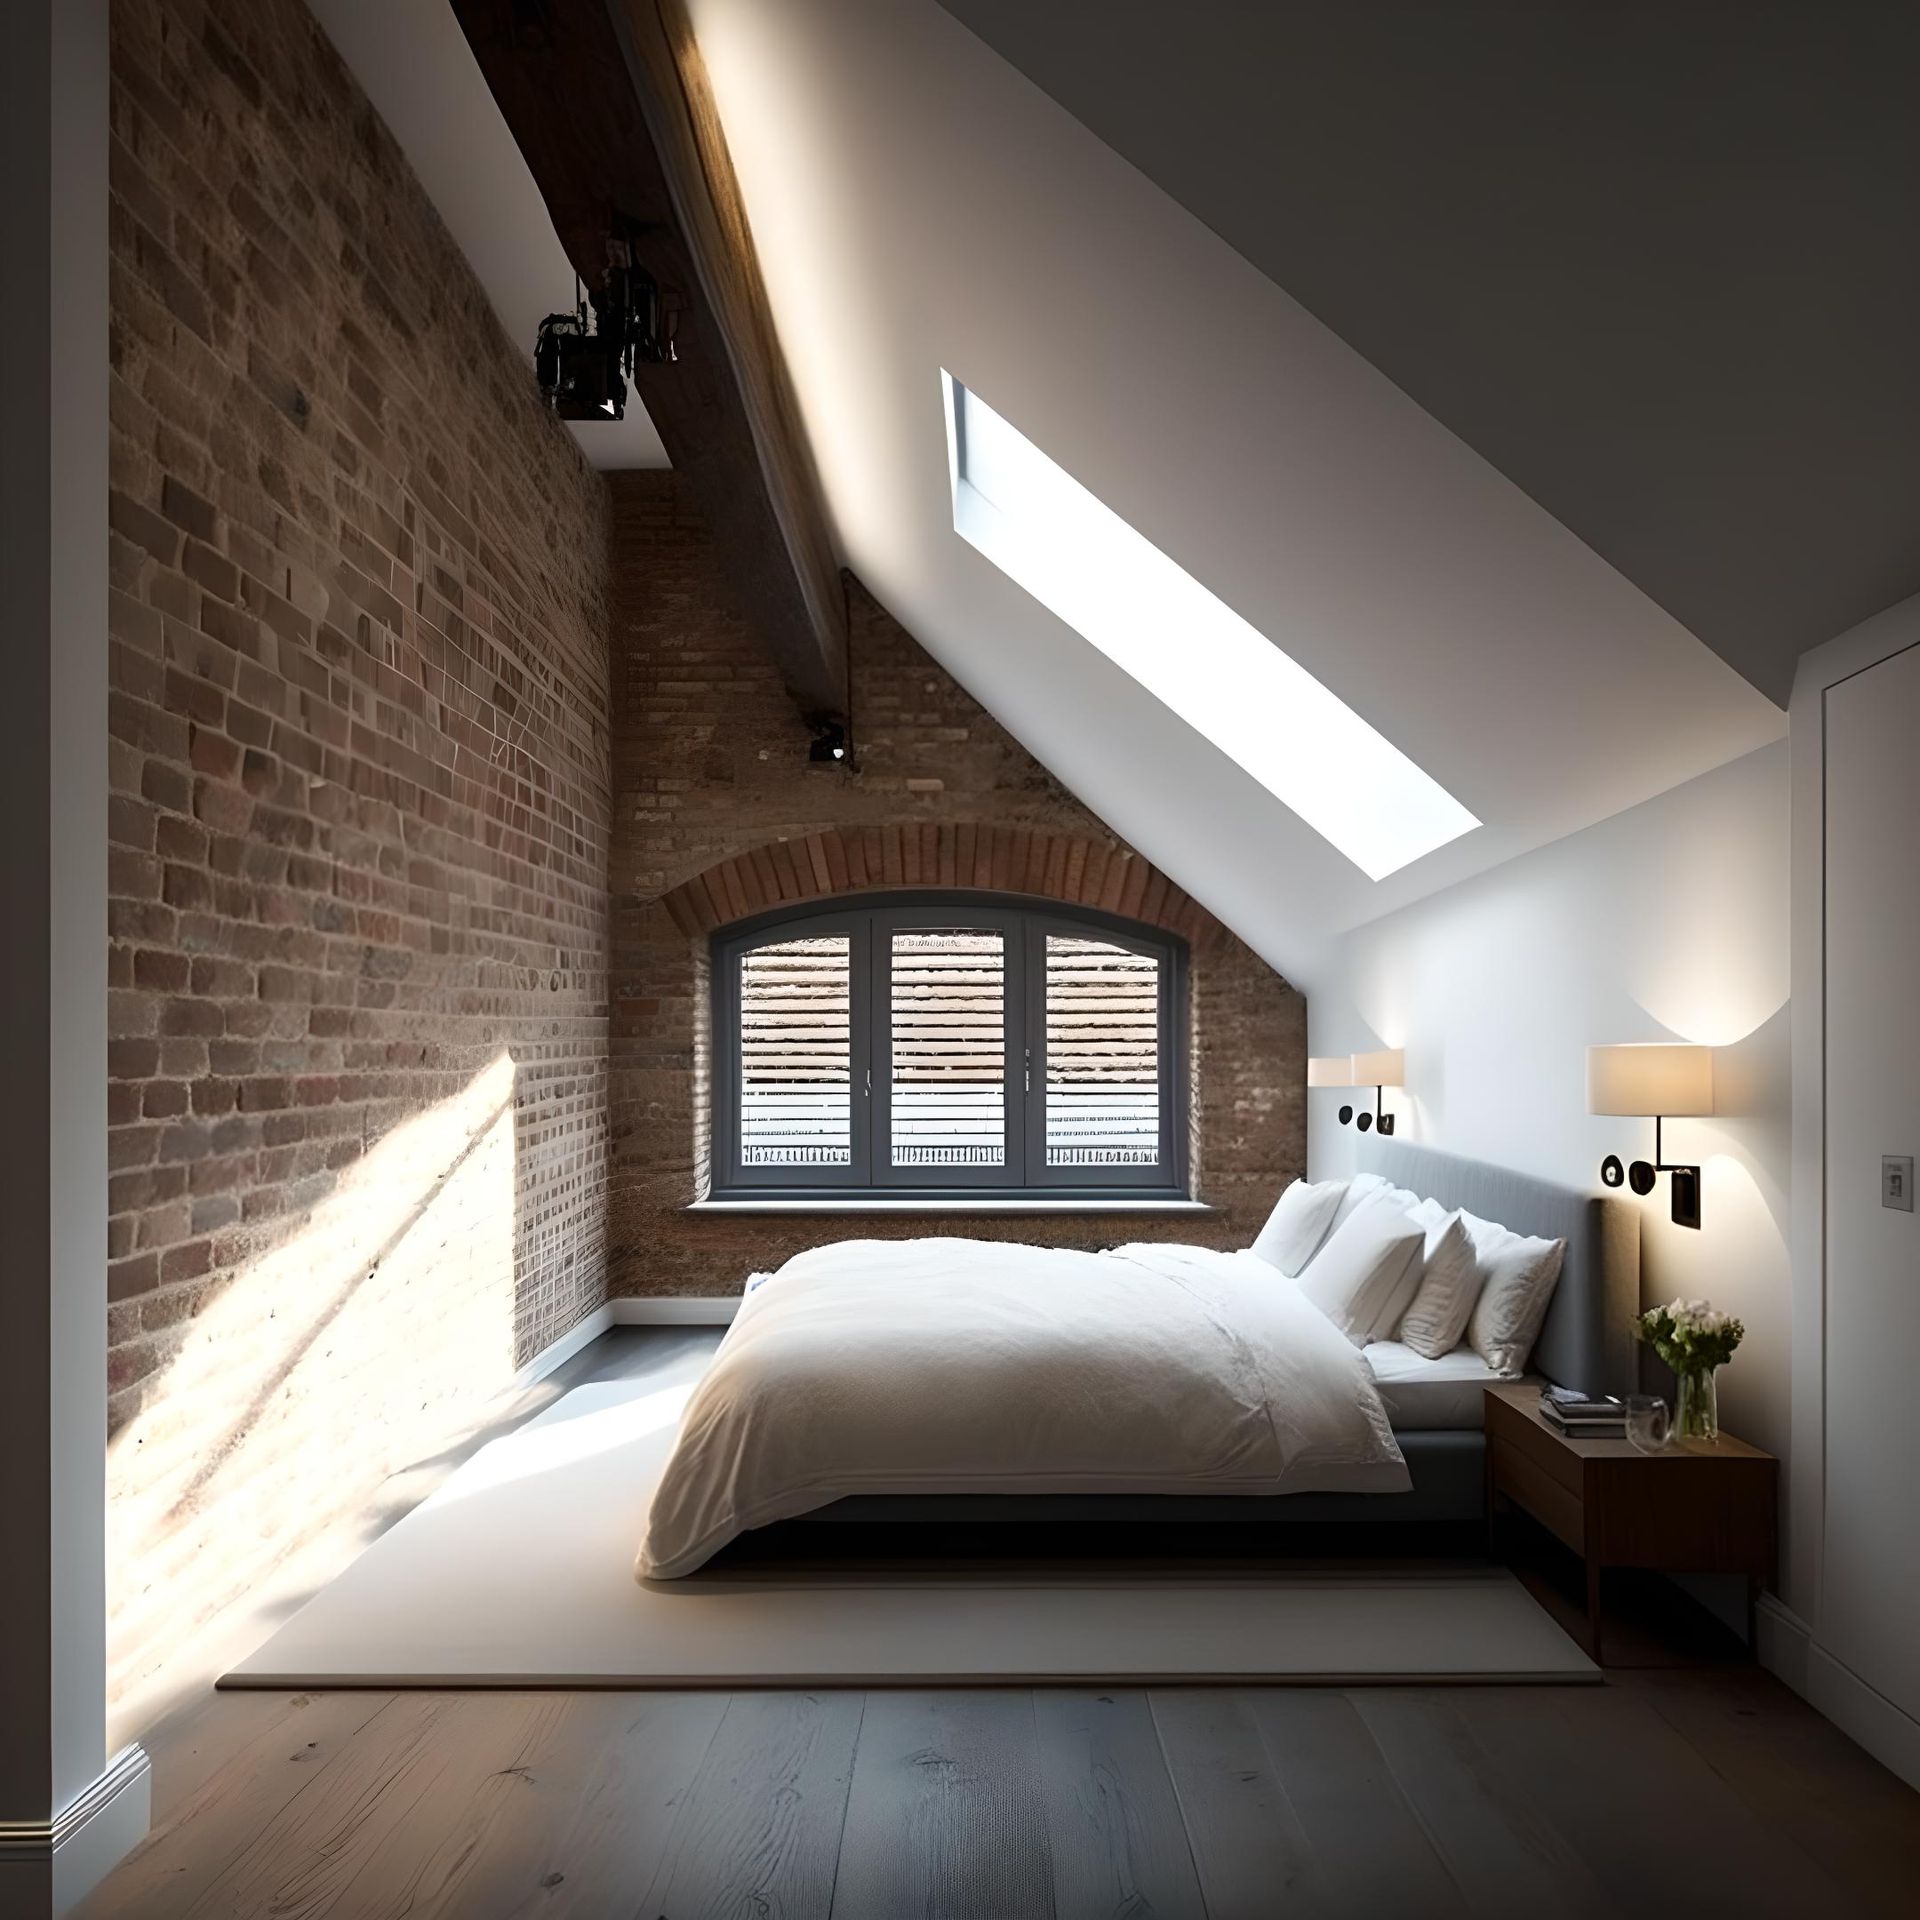 Traditional brick London house with modern angular loft conversion. Skylight adds natural light to s